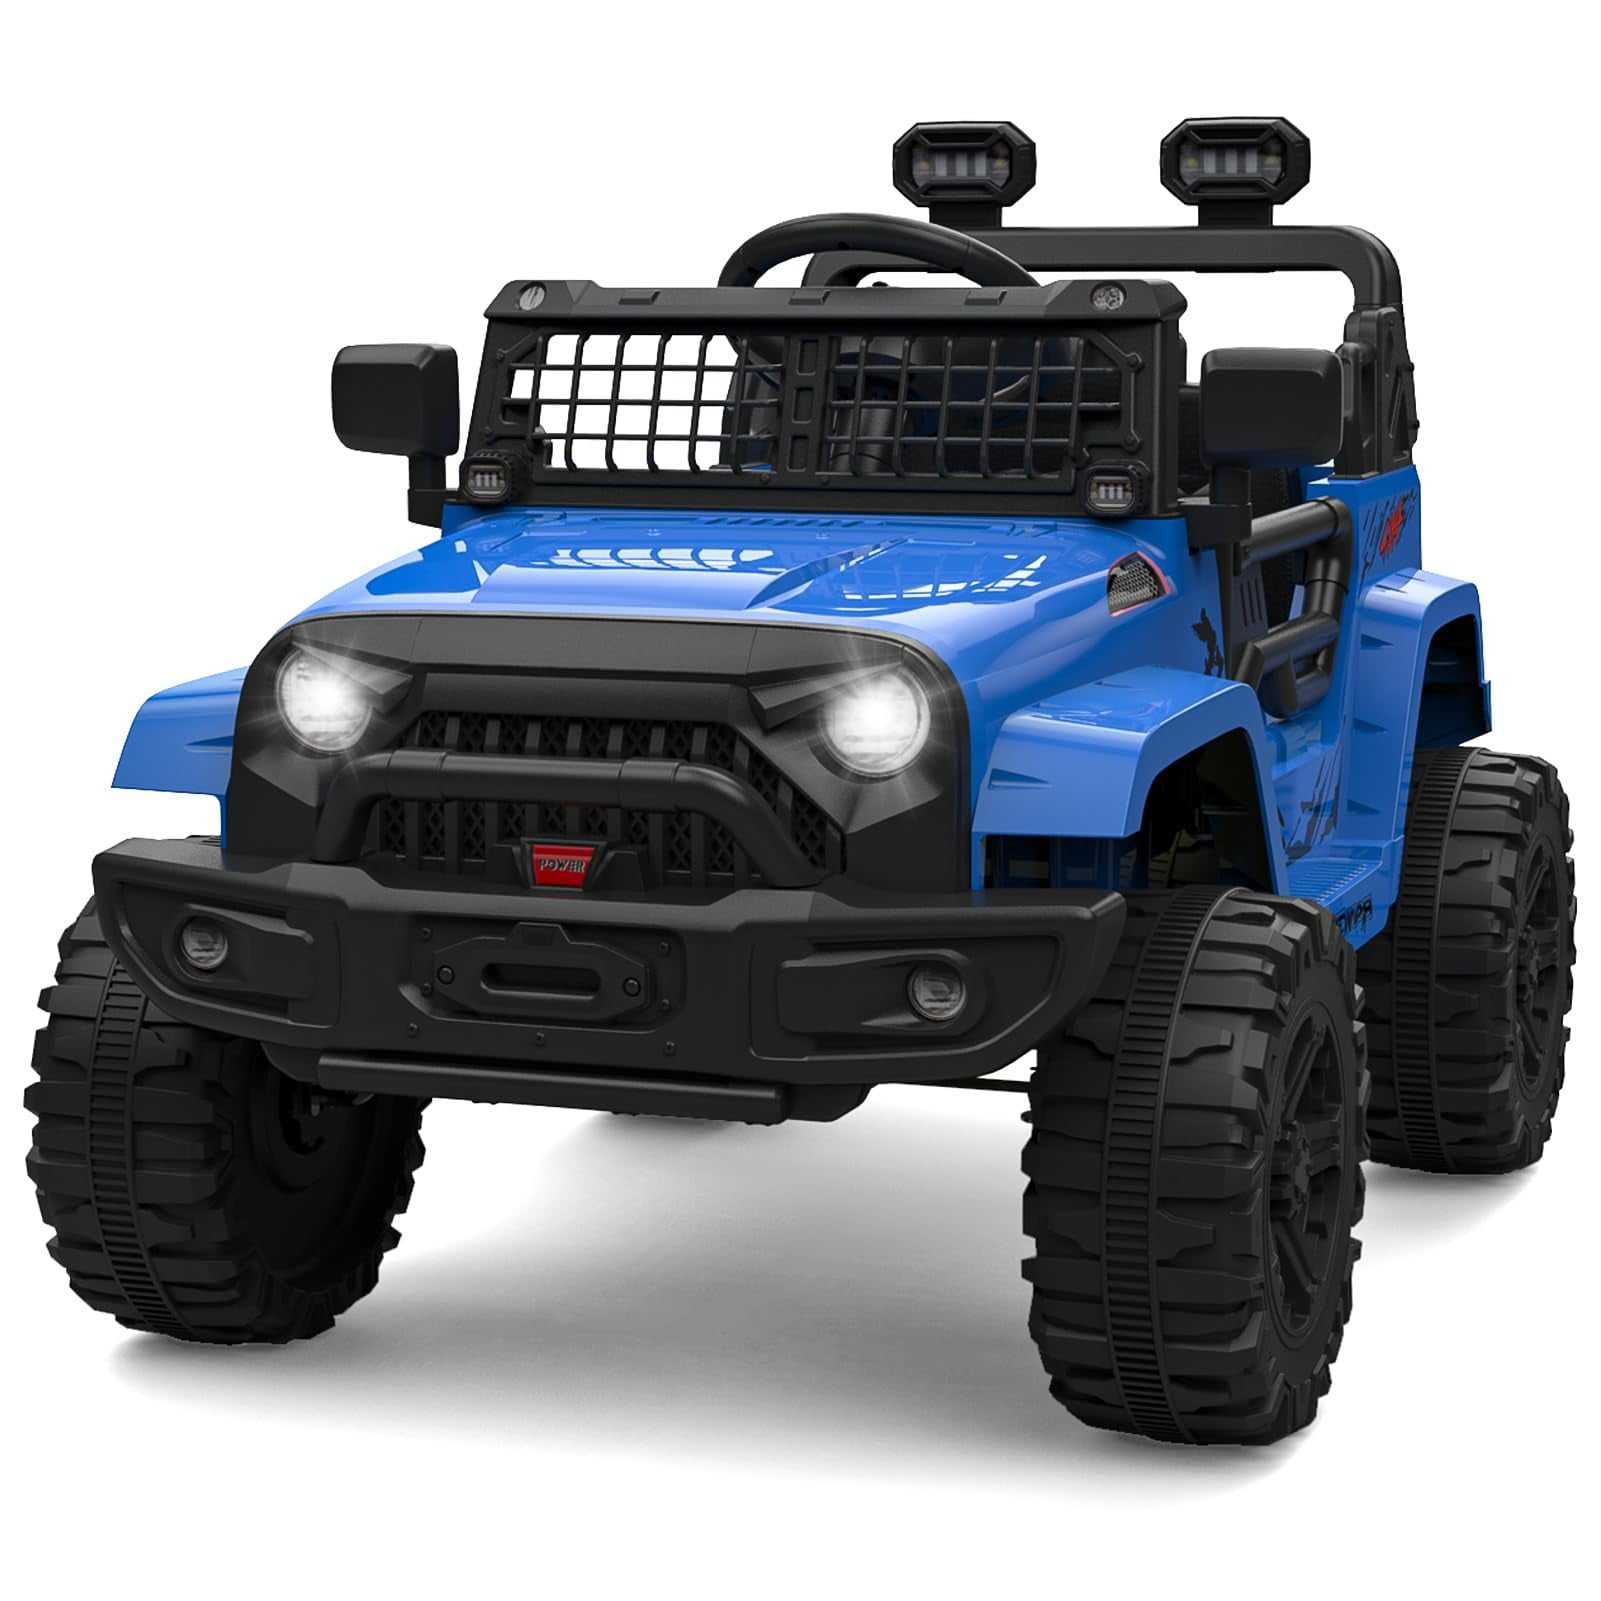 Ride on Truck Car 12V Kids Electric Mini Jeep with Remote Control Spring Suspension, LED Lights, Bluetooth, 2 Speeds (Blue) - image 1 of 8